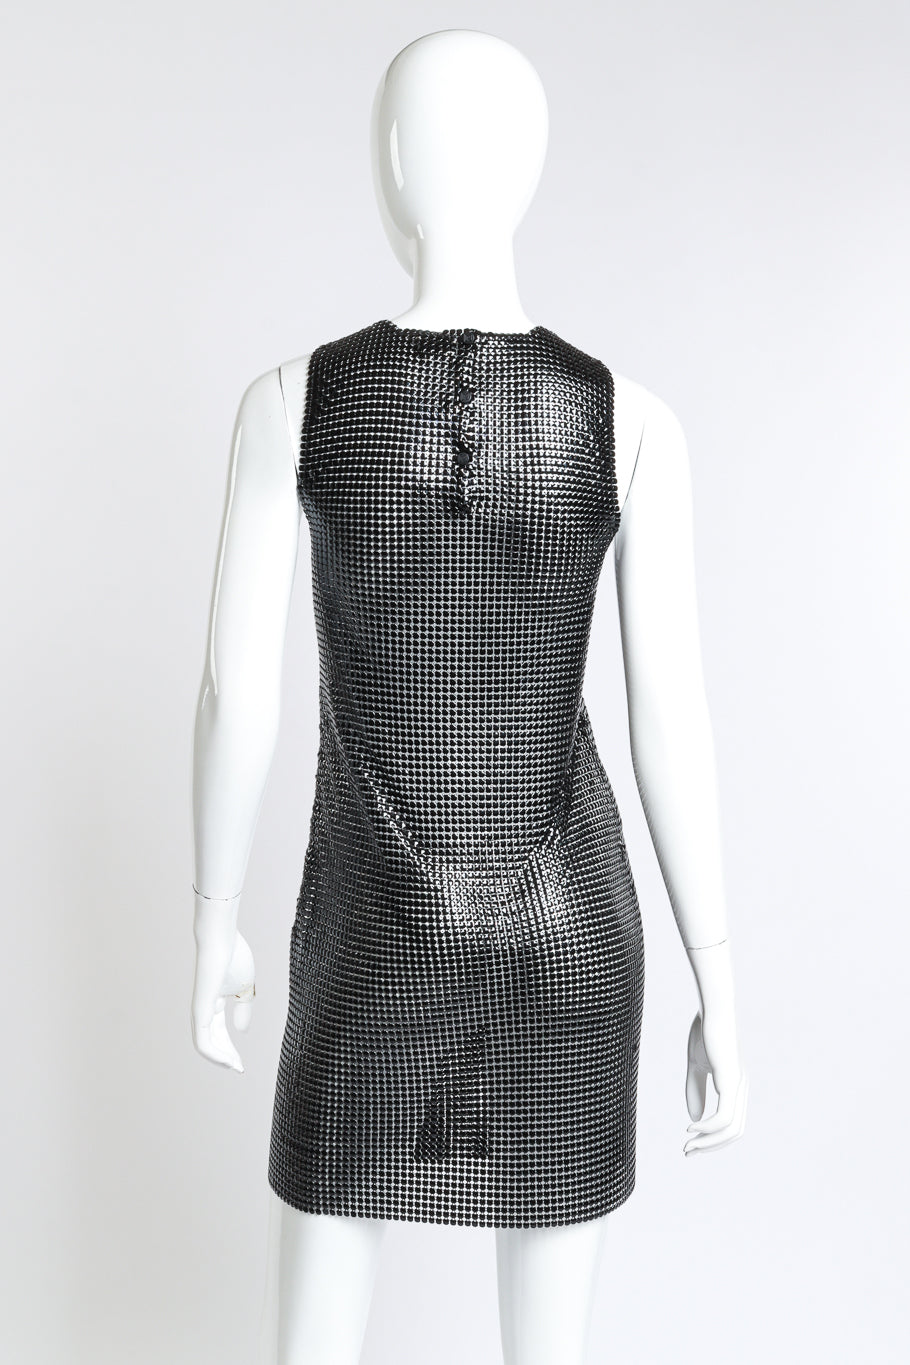 Paco Rabanne Racer Front Chainmail Dress back on mannequin @recess la